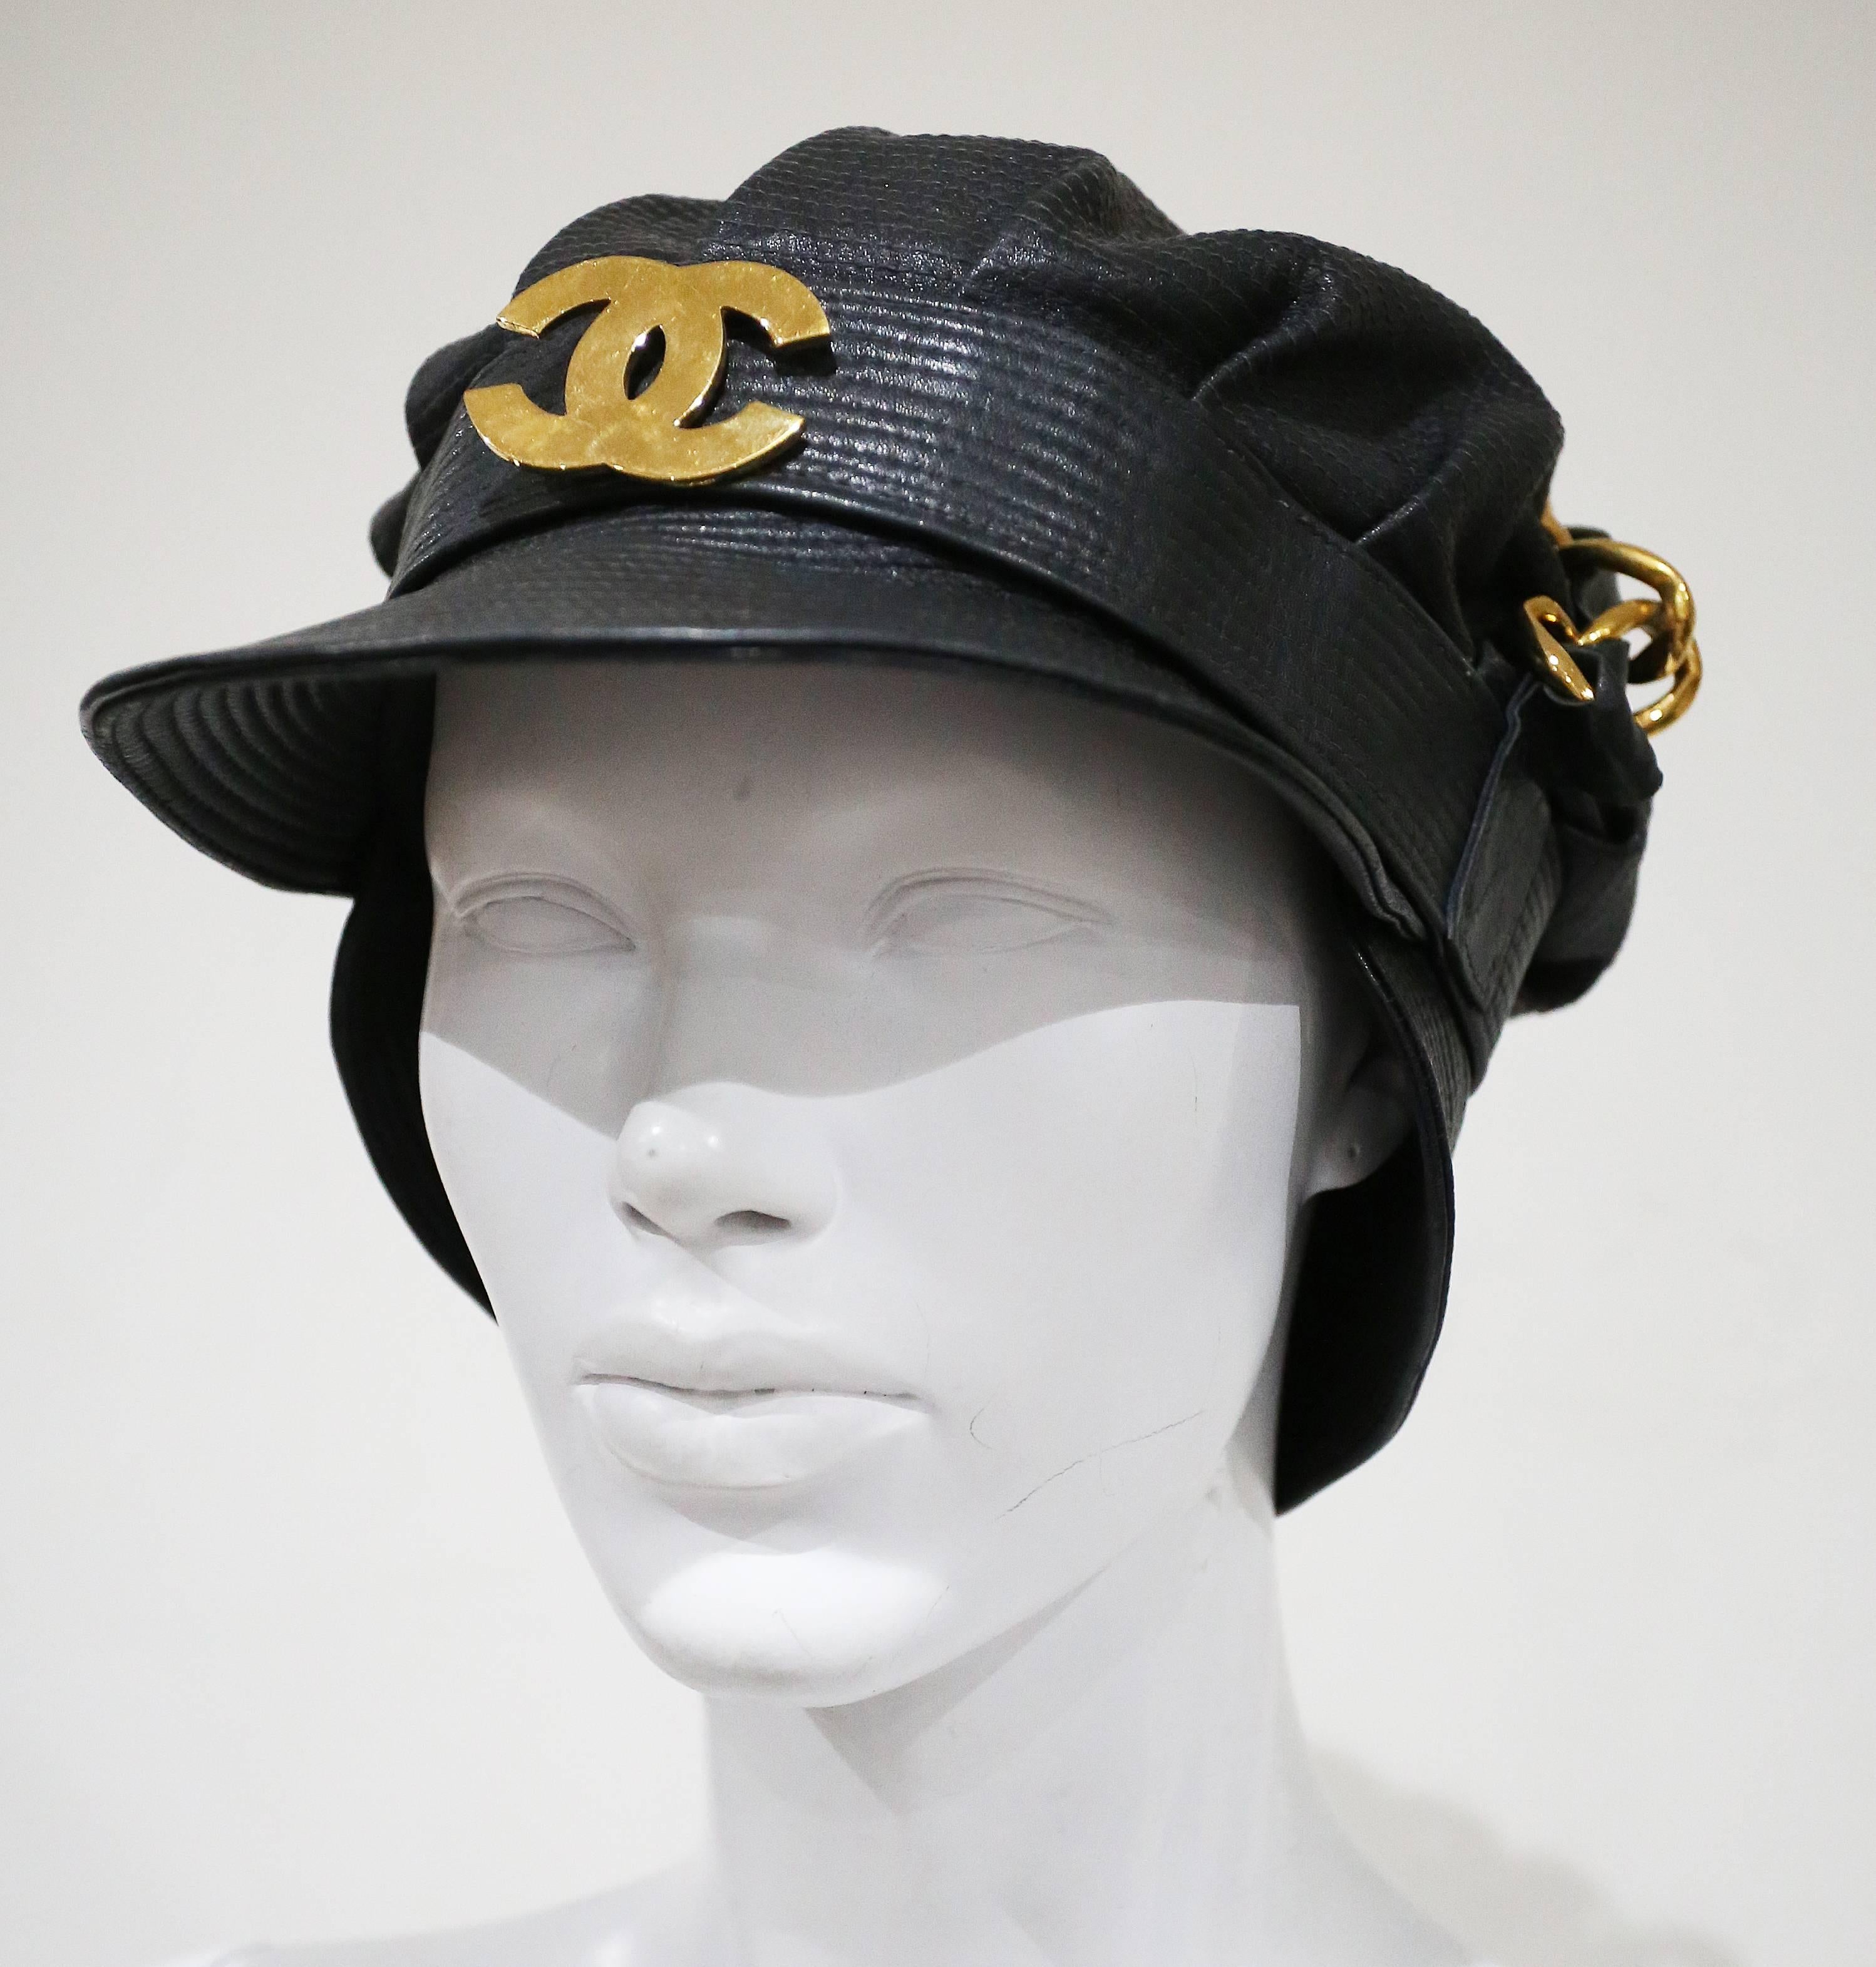 Rare and iconic Karl Lagerfeld for Chanel biker cap, circa 1992. The hat features an extra large chain on top and Chanel 'CC' logo on front. The hat was worn by supermodel Kristen McMenamy for Vogue Italia, May 1992, photographed by Steven